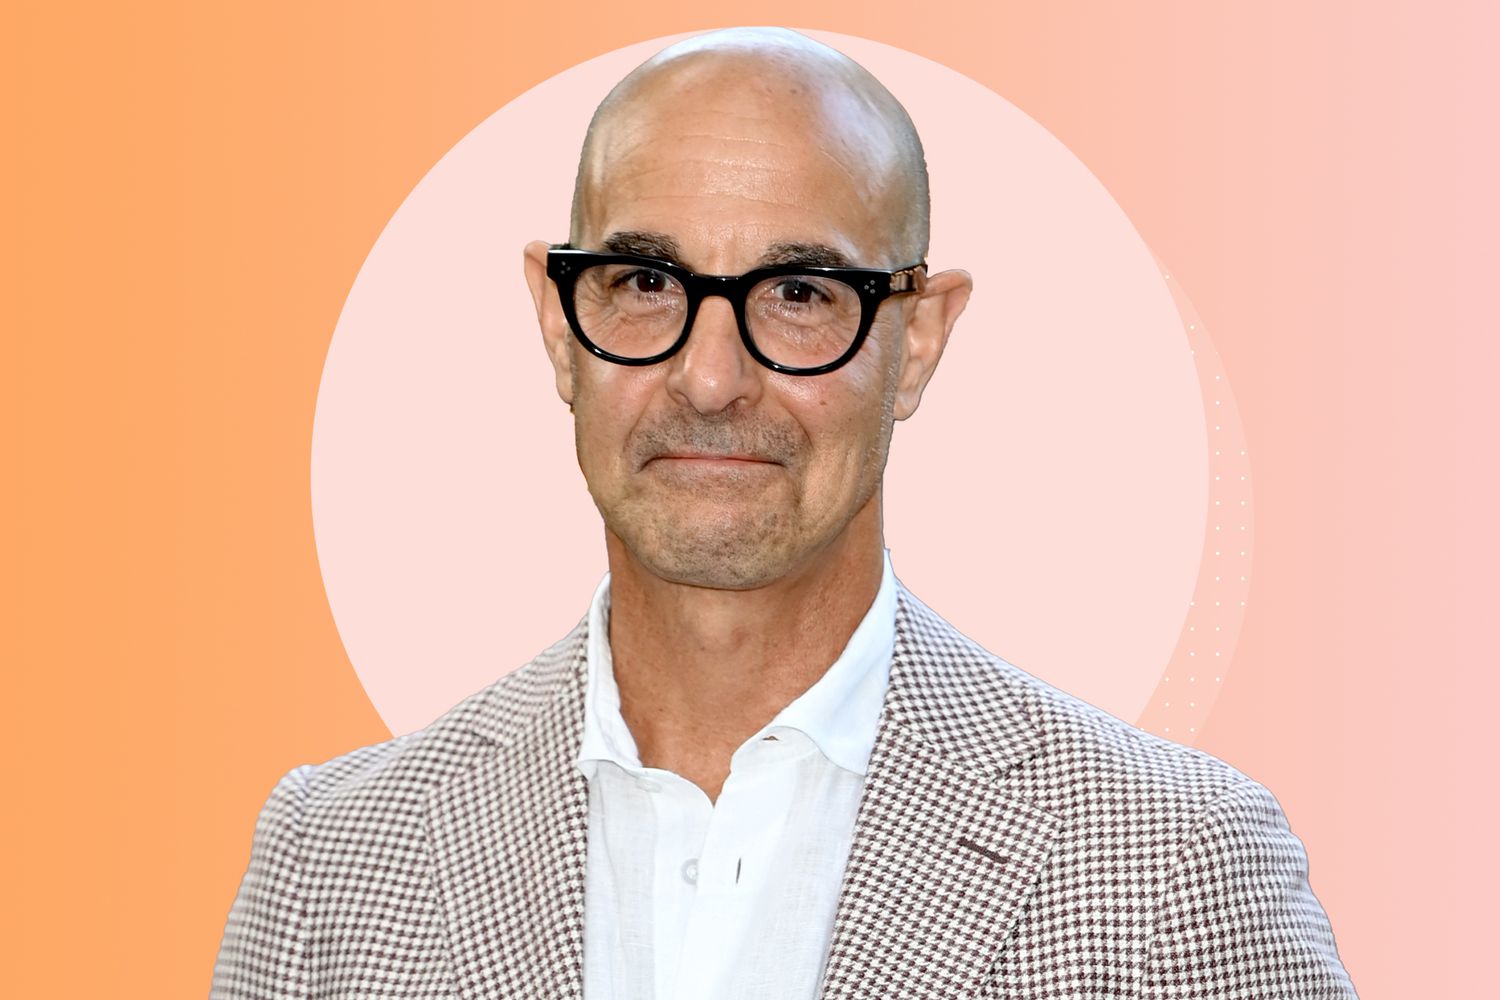 Stanley Tucci Just Made This Beautiful Spring Brunch Dish with Leftover Pasta